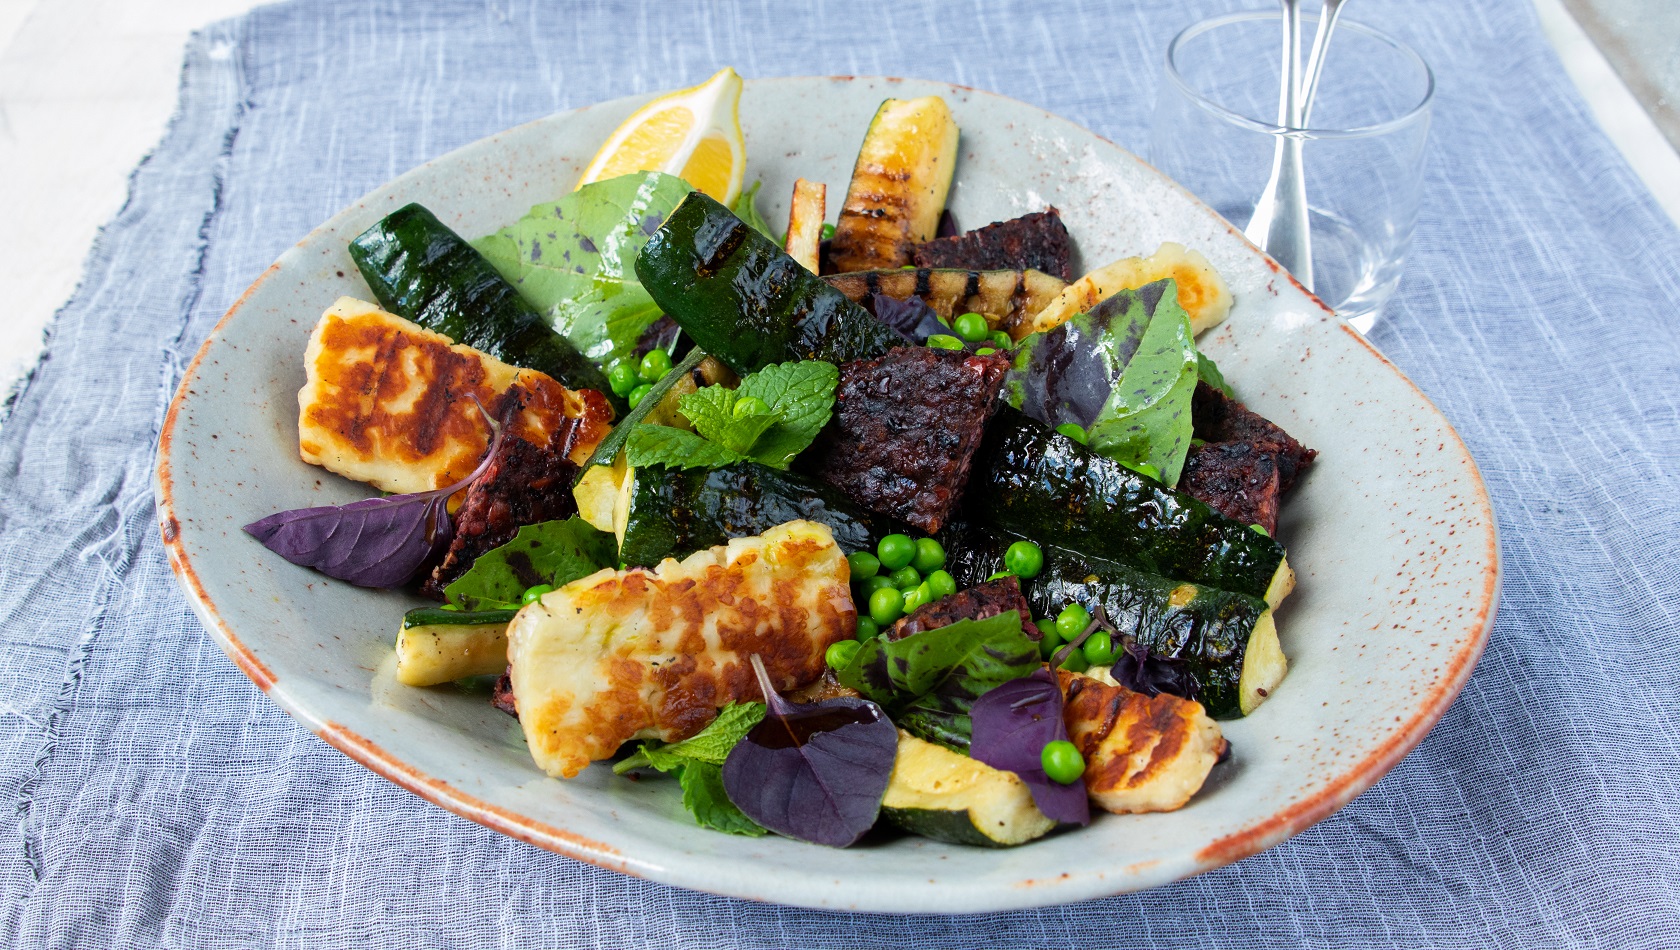 Grilled Courgette, Beet Burger & Haloumi Salad